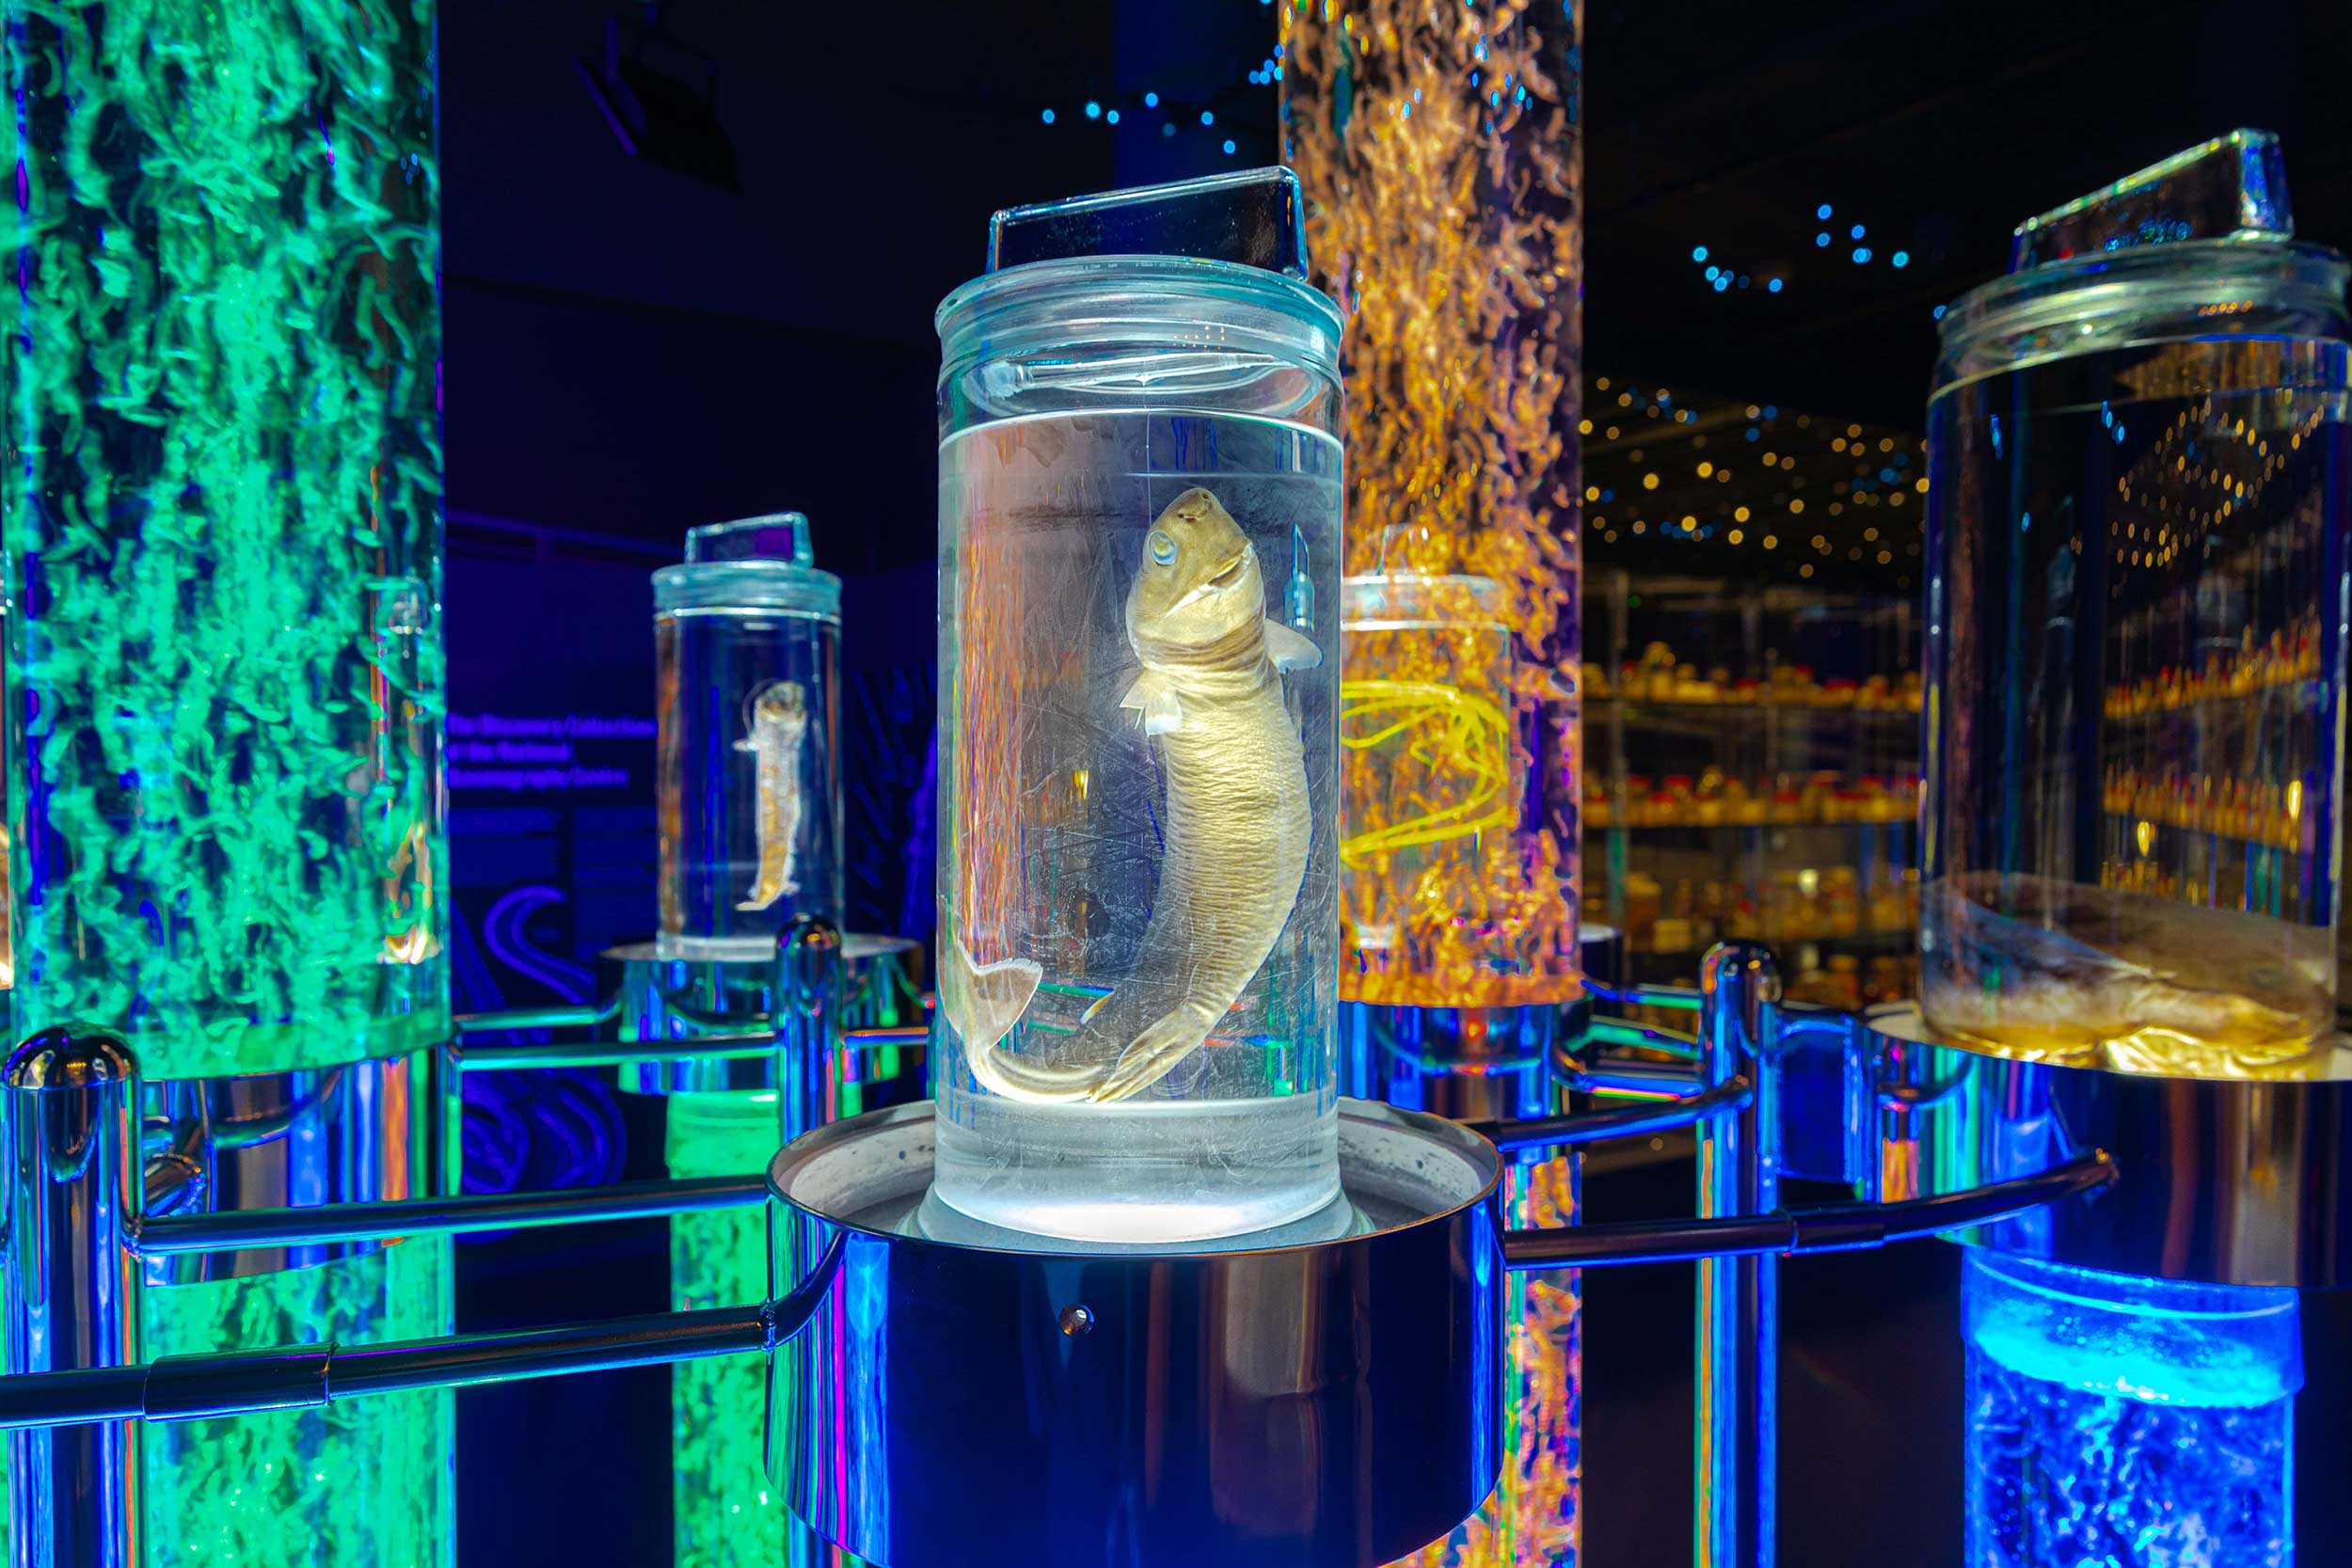 Image focusing on a clear jar with a preserved deep-sea specimen in it. In the background are a couple of similar jars, as well as two tubes lit up neon green and yellow.